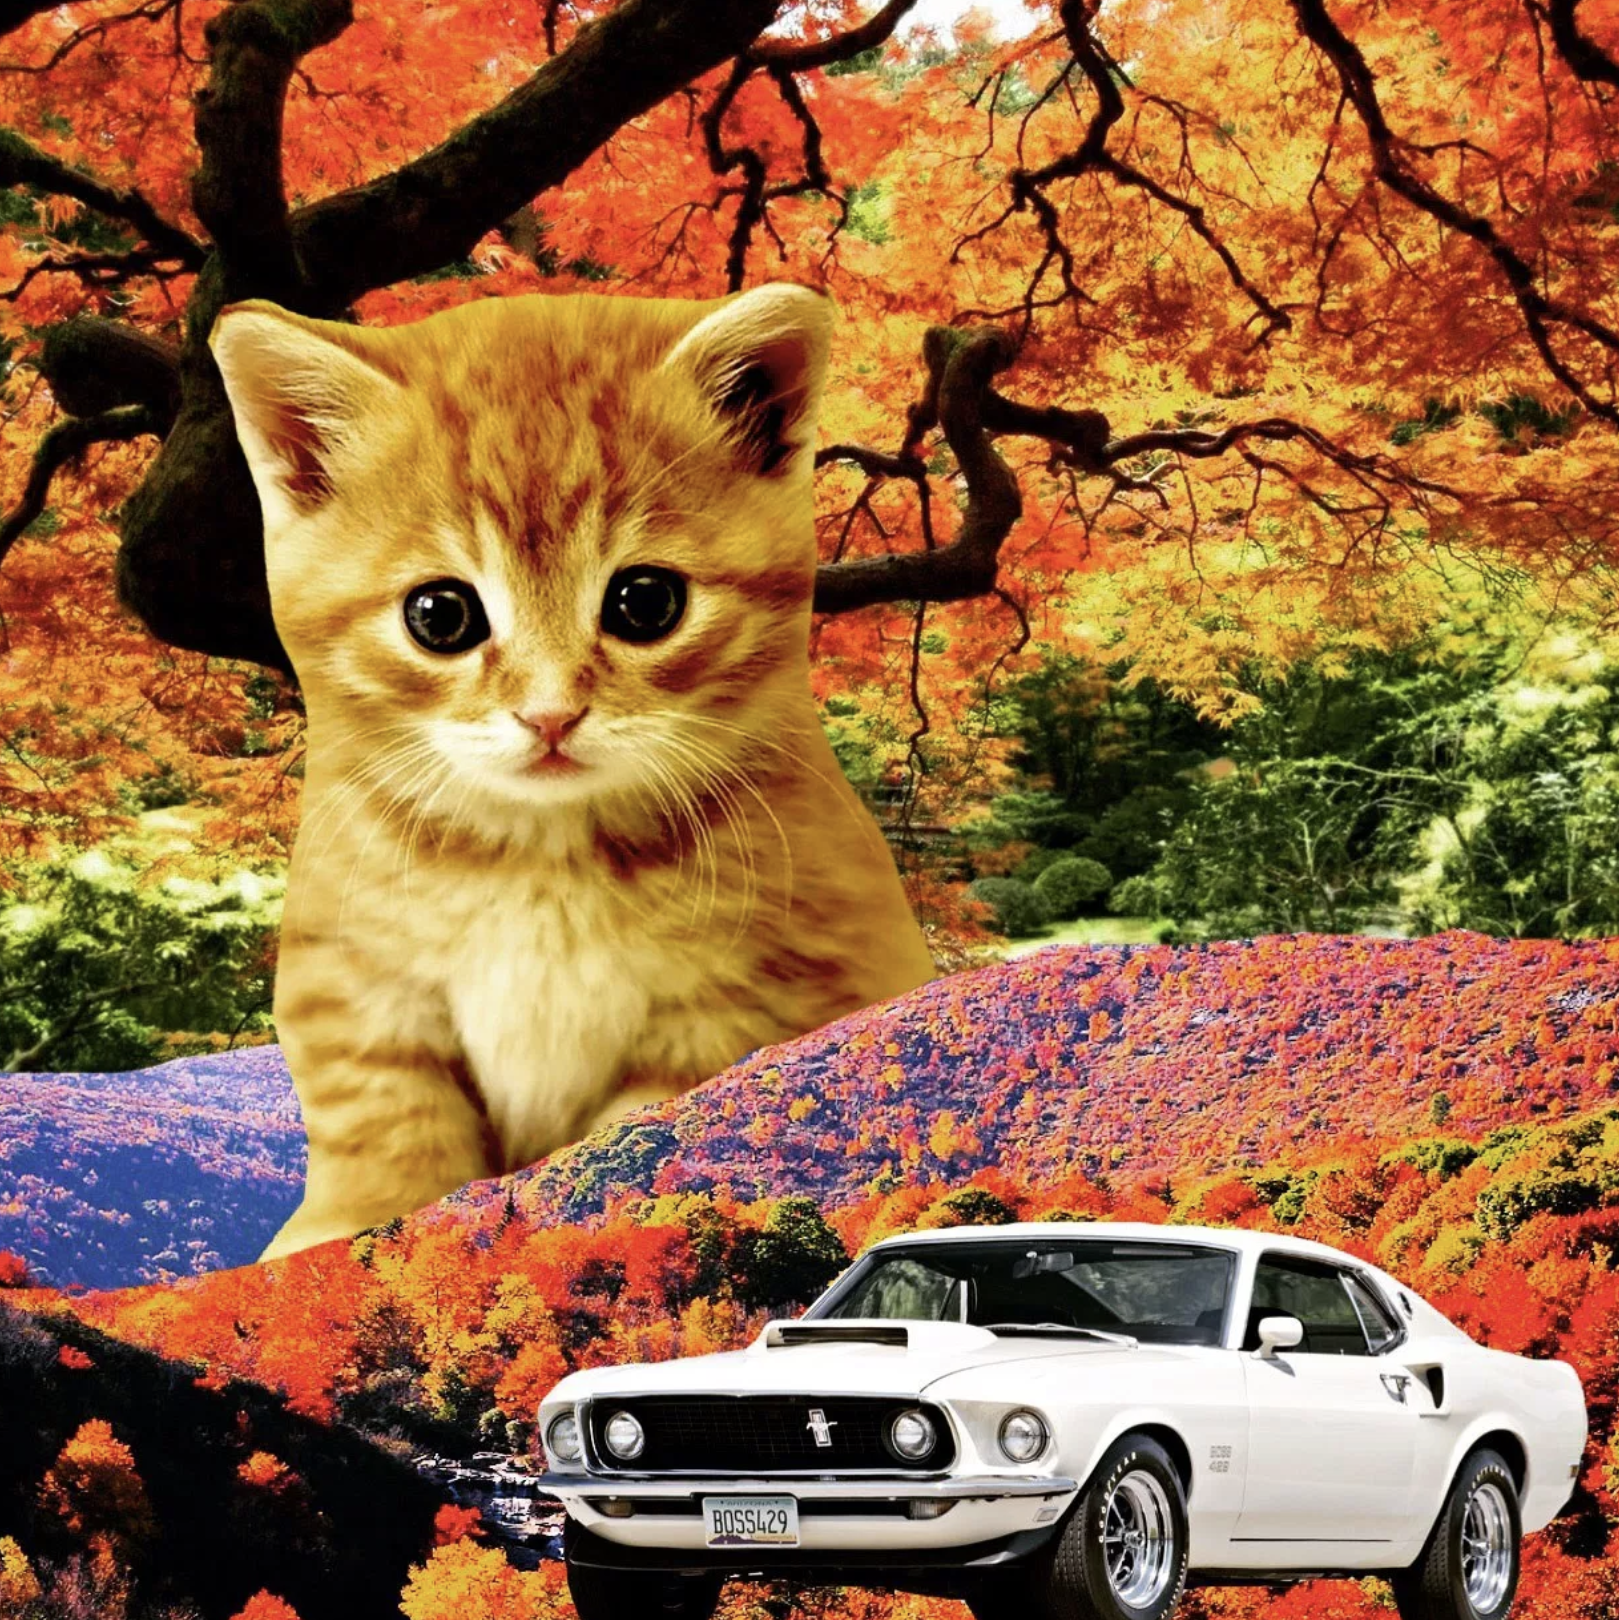 "Autumn" - Cats and Cars (print)